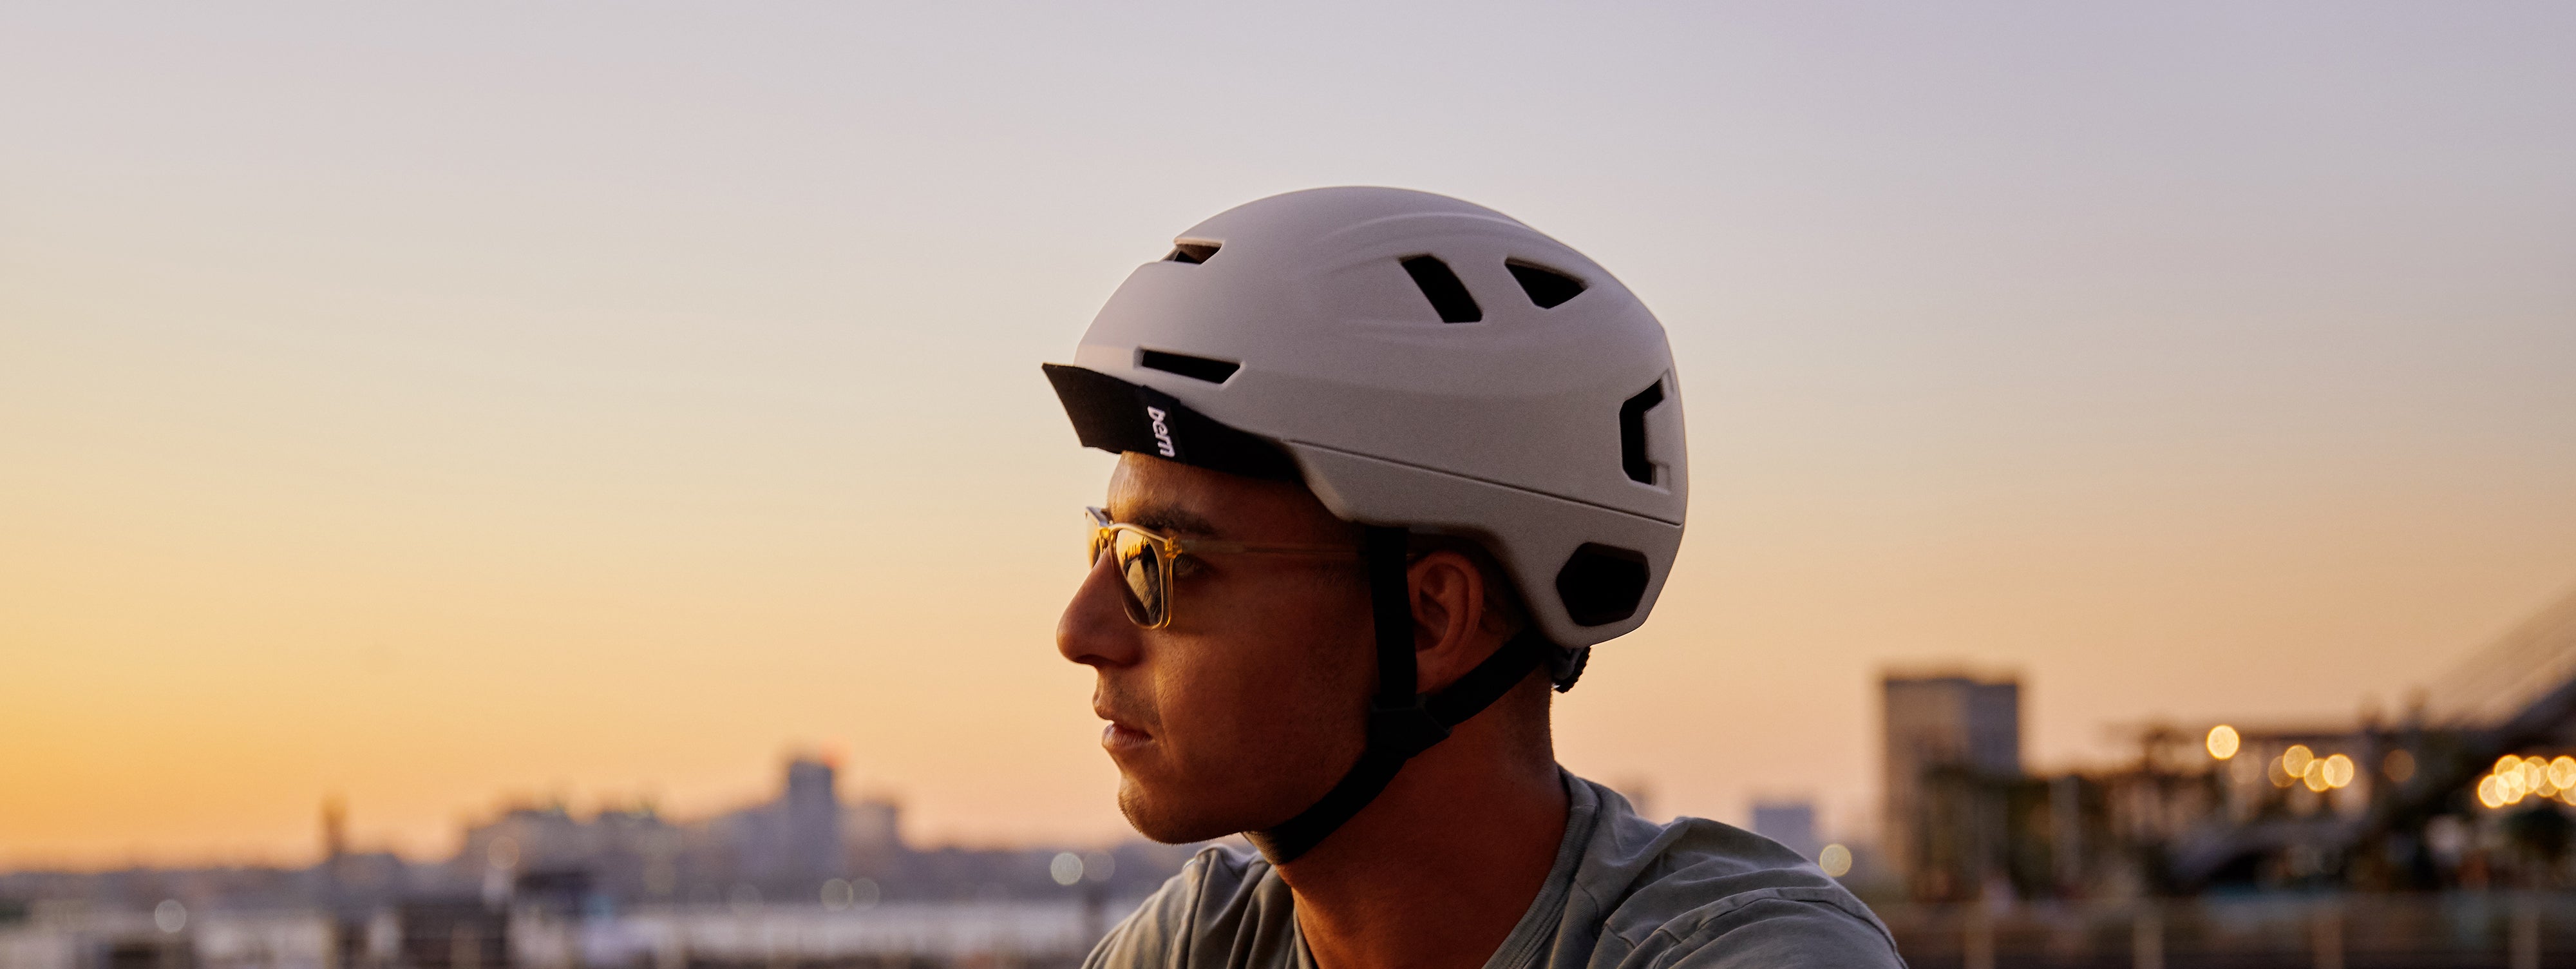 Urban Helmets: Style & Safety for City Cyclists